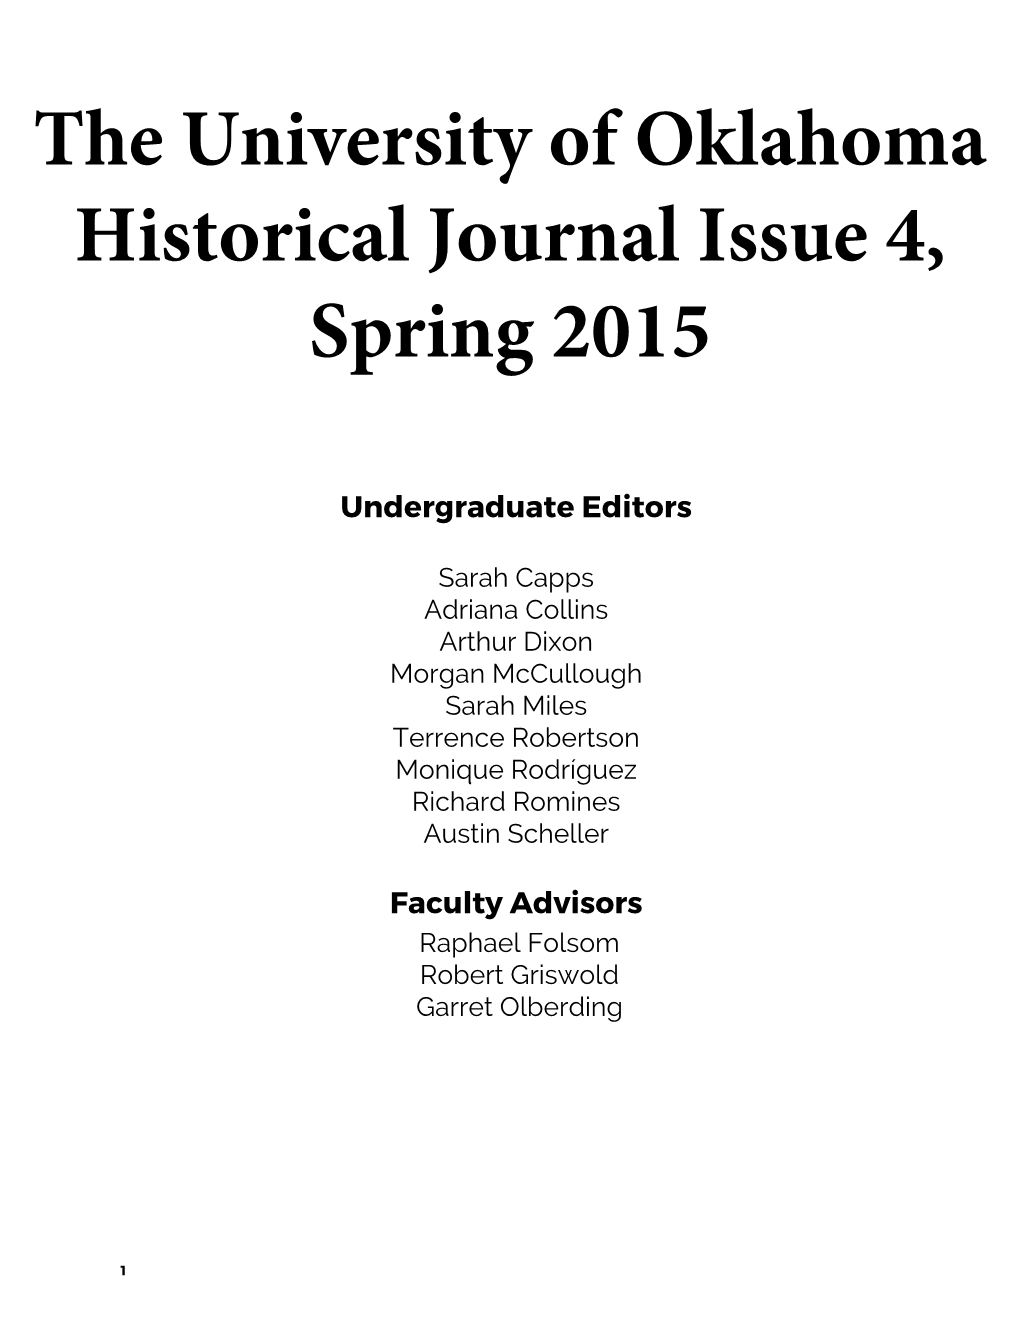 The University of Oklahoma Historical Journal Issue 4, Spring 2015